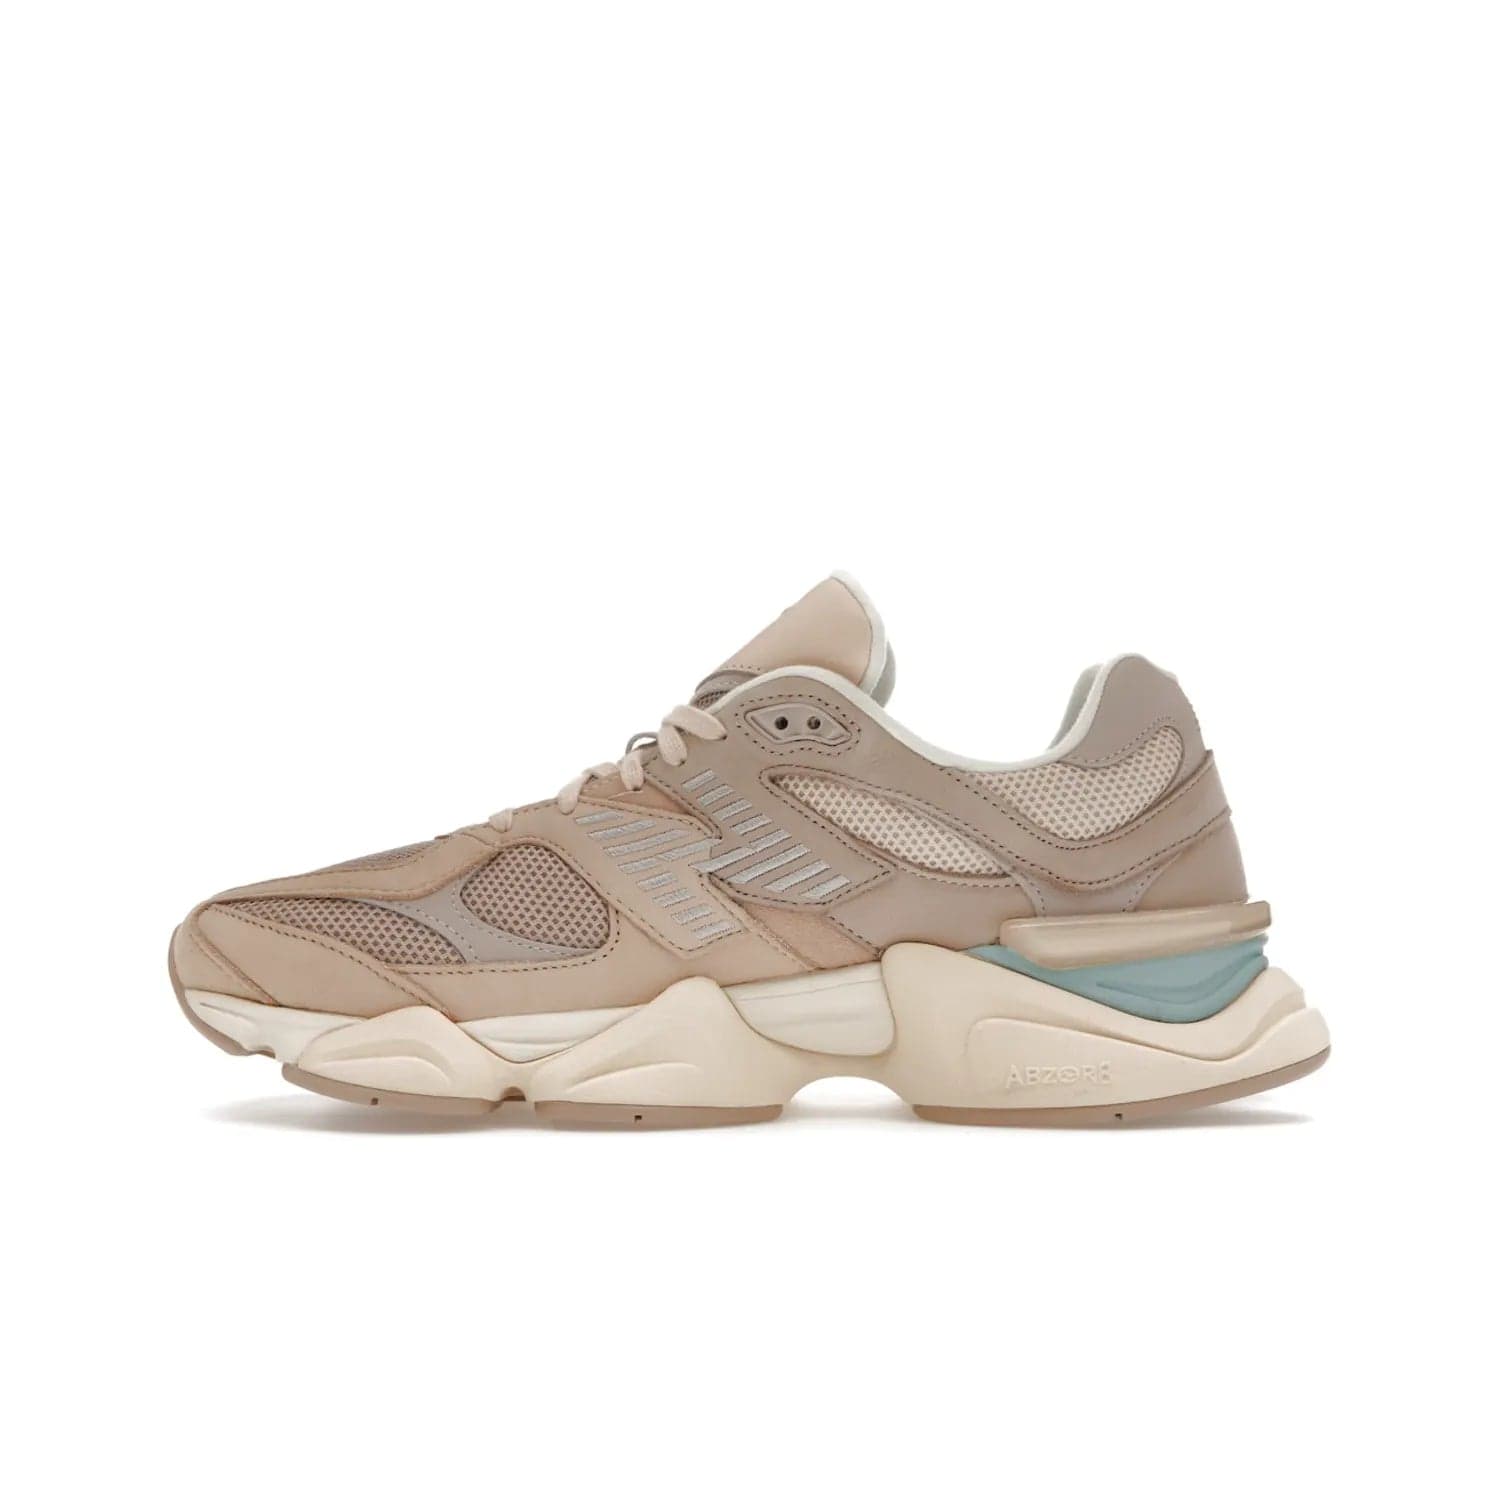 New Balance 9060 Ivory Cream Pink Sand - Image 19 - Only at www.BallersClubKickz.com - New Balance 9060 Ivory Cream Pink Sand - Sleek meshed upper, premium suede overlays, ABZORB cushioning. Get this unique sneaker ahead of the trend, launching December 6th, 2022!